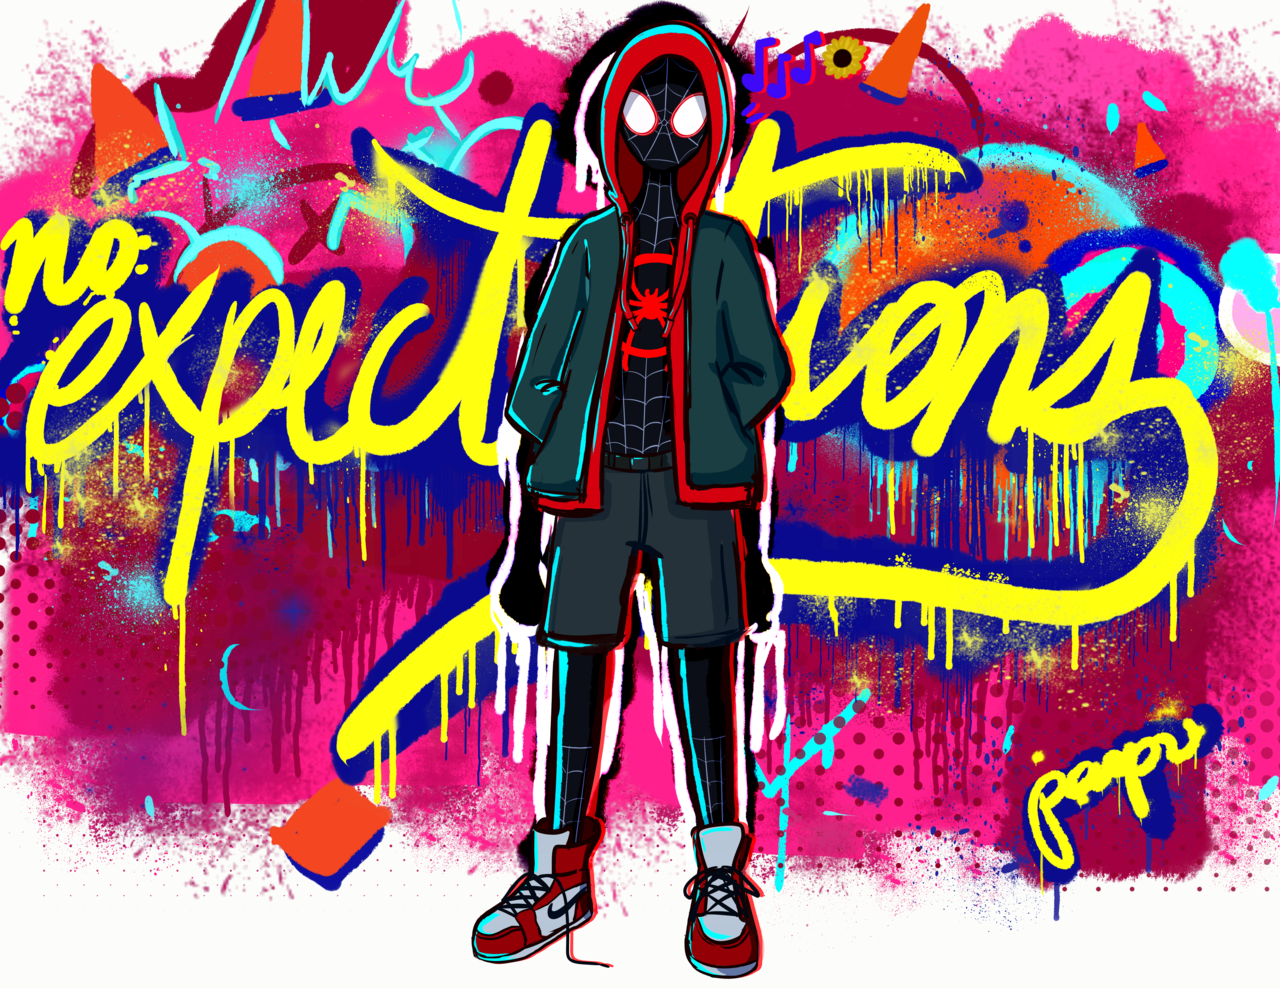  Spider  Man  Into  The Spider  Verse  Expectations Graffiti  